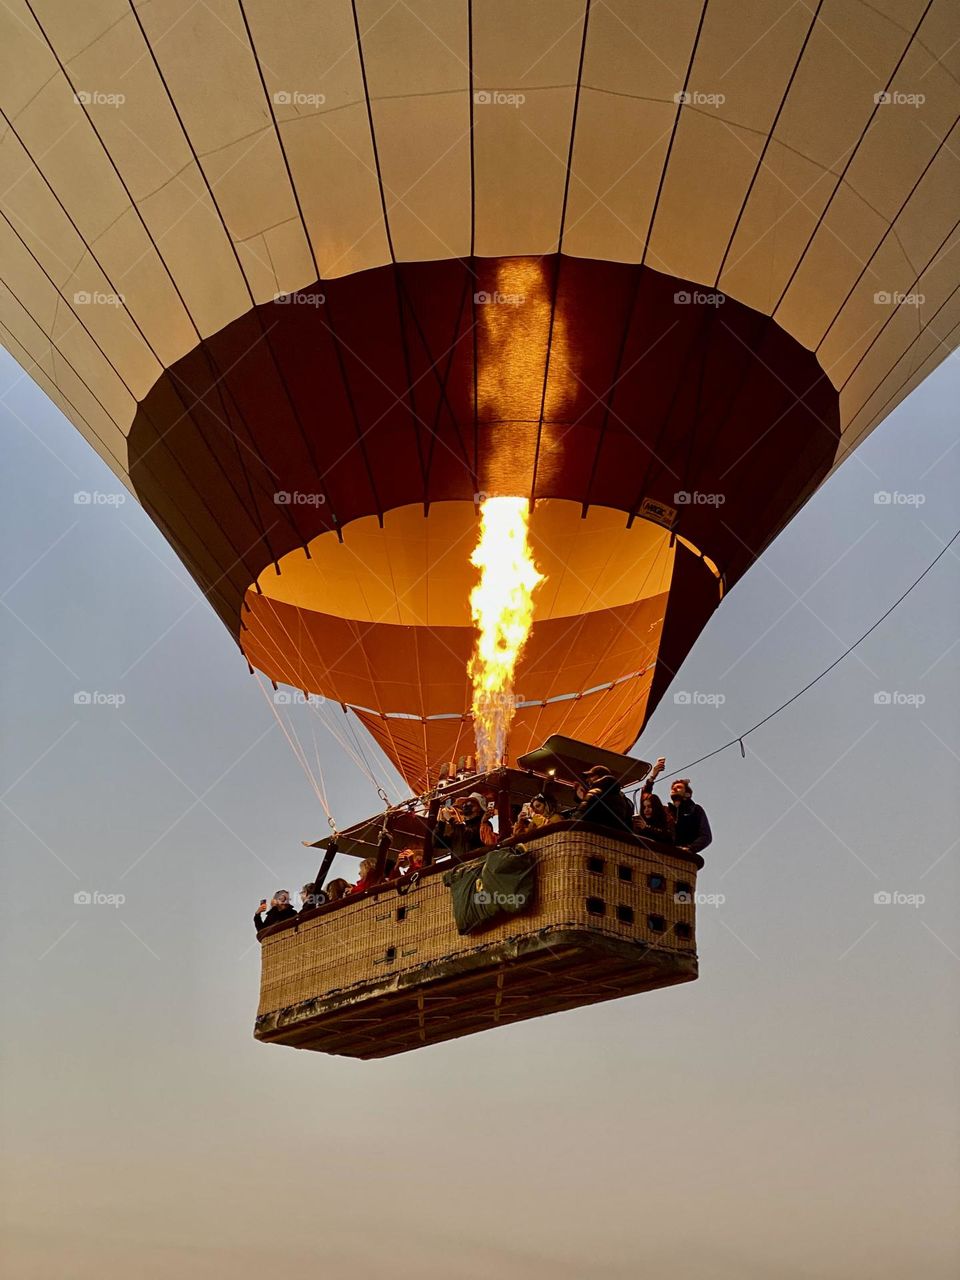 Hot air balloons in Luxor city, Egypt. 